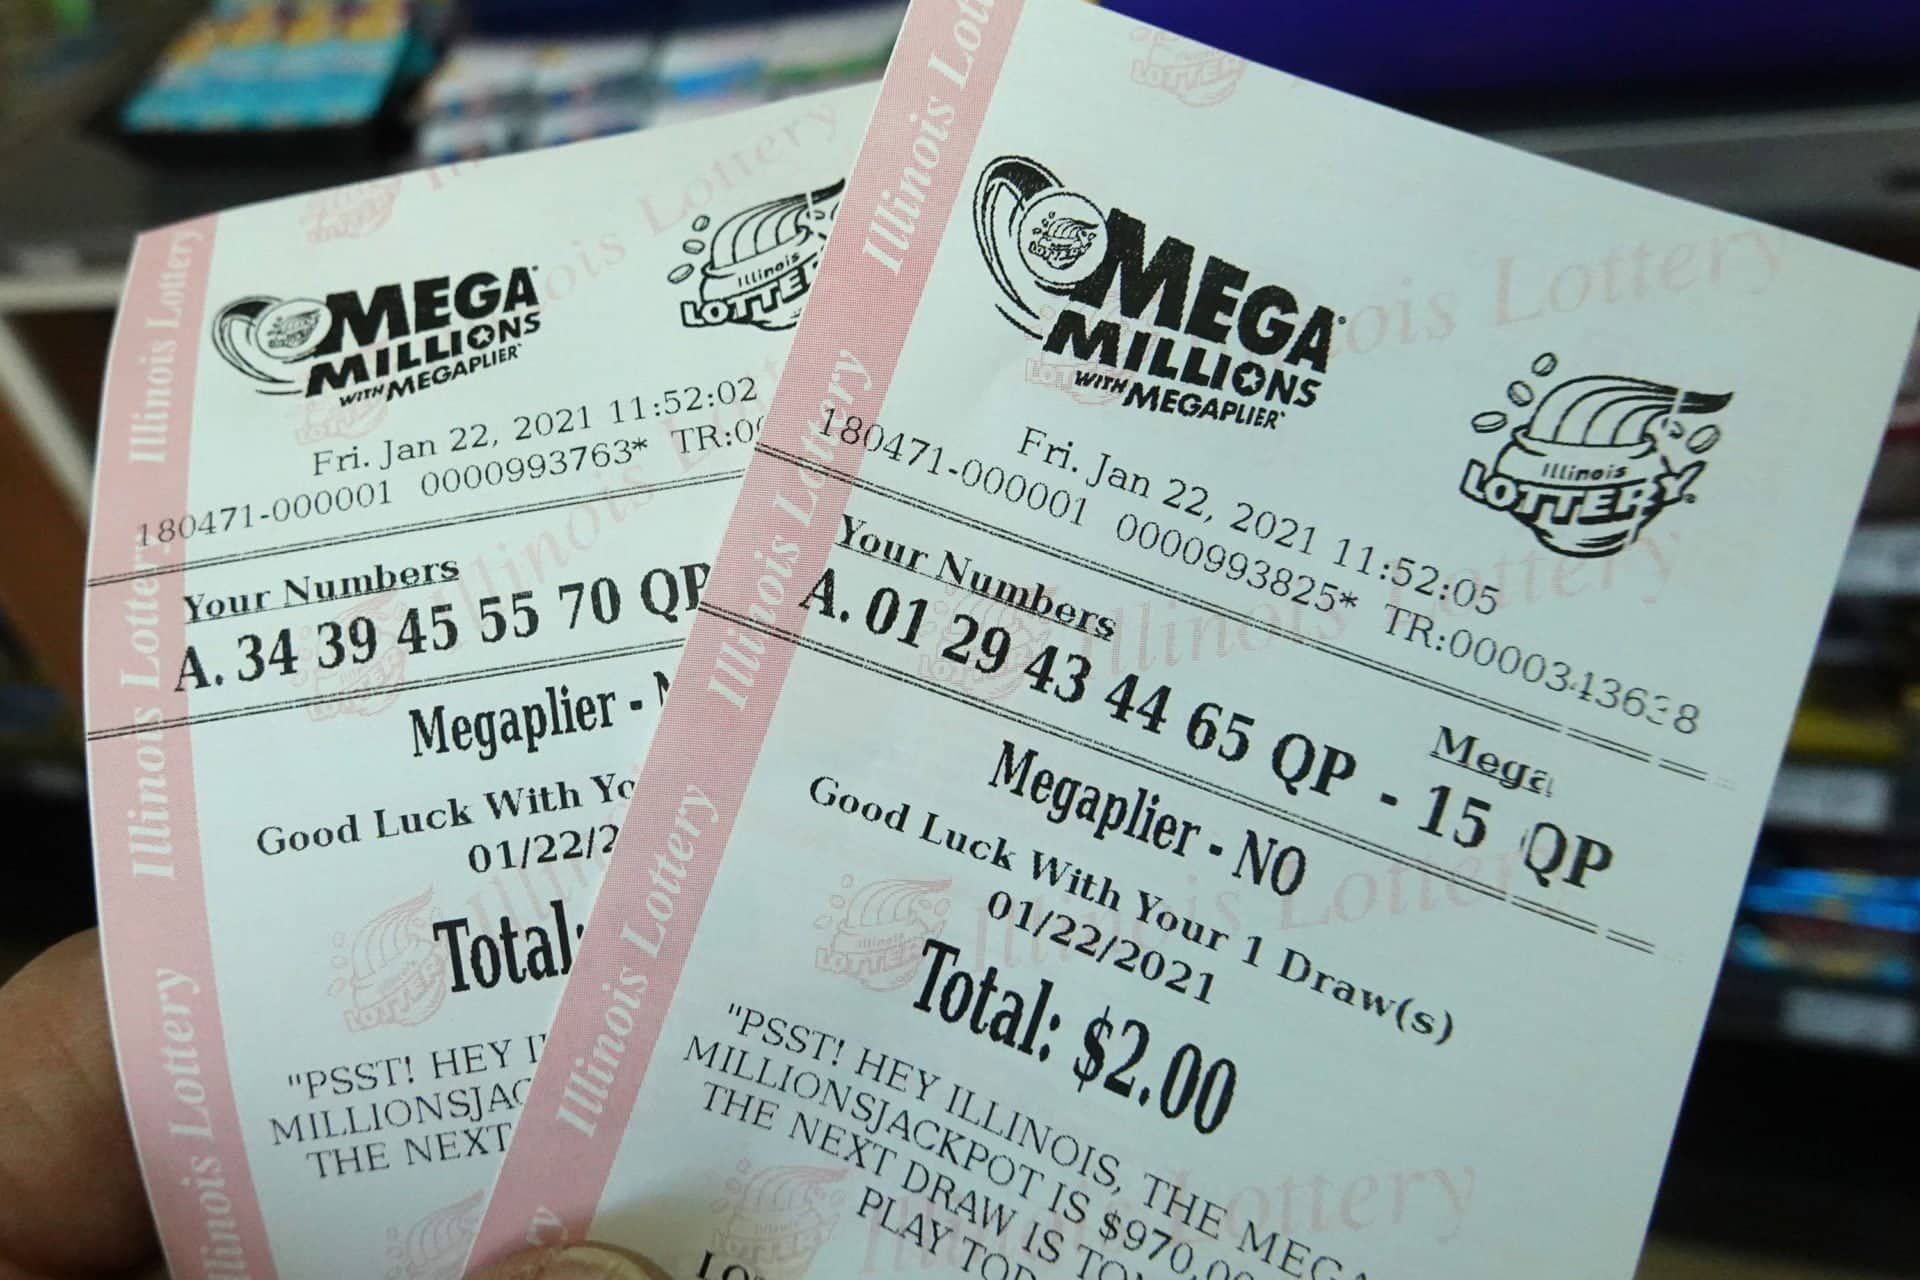 What time is Mega millions drawing on July 29? Wothappen